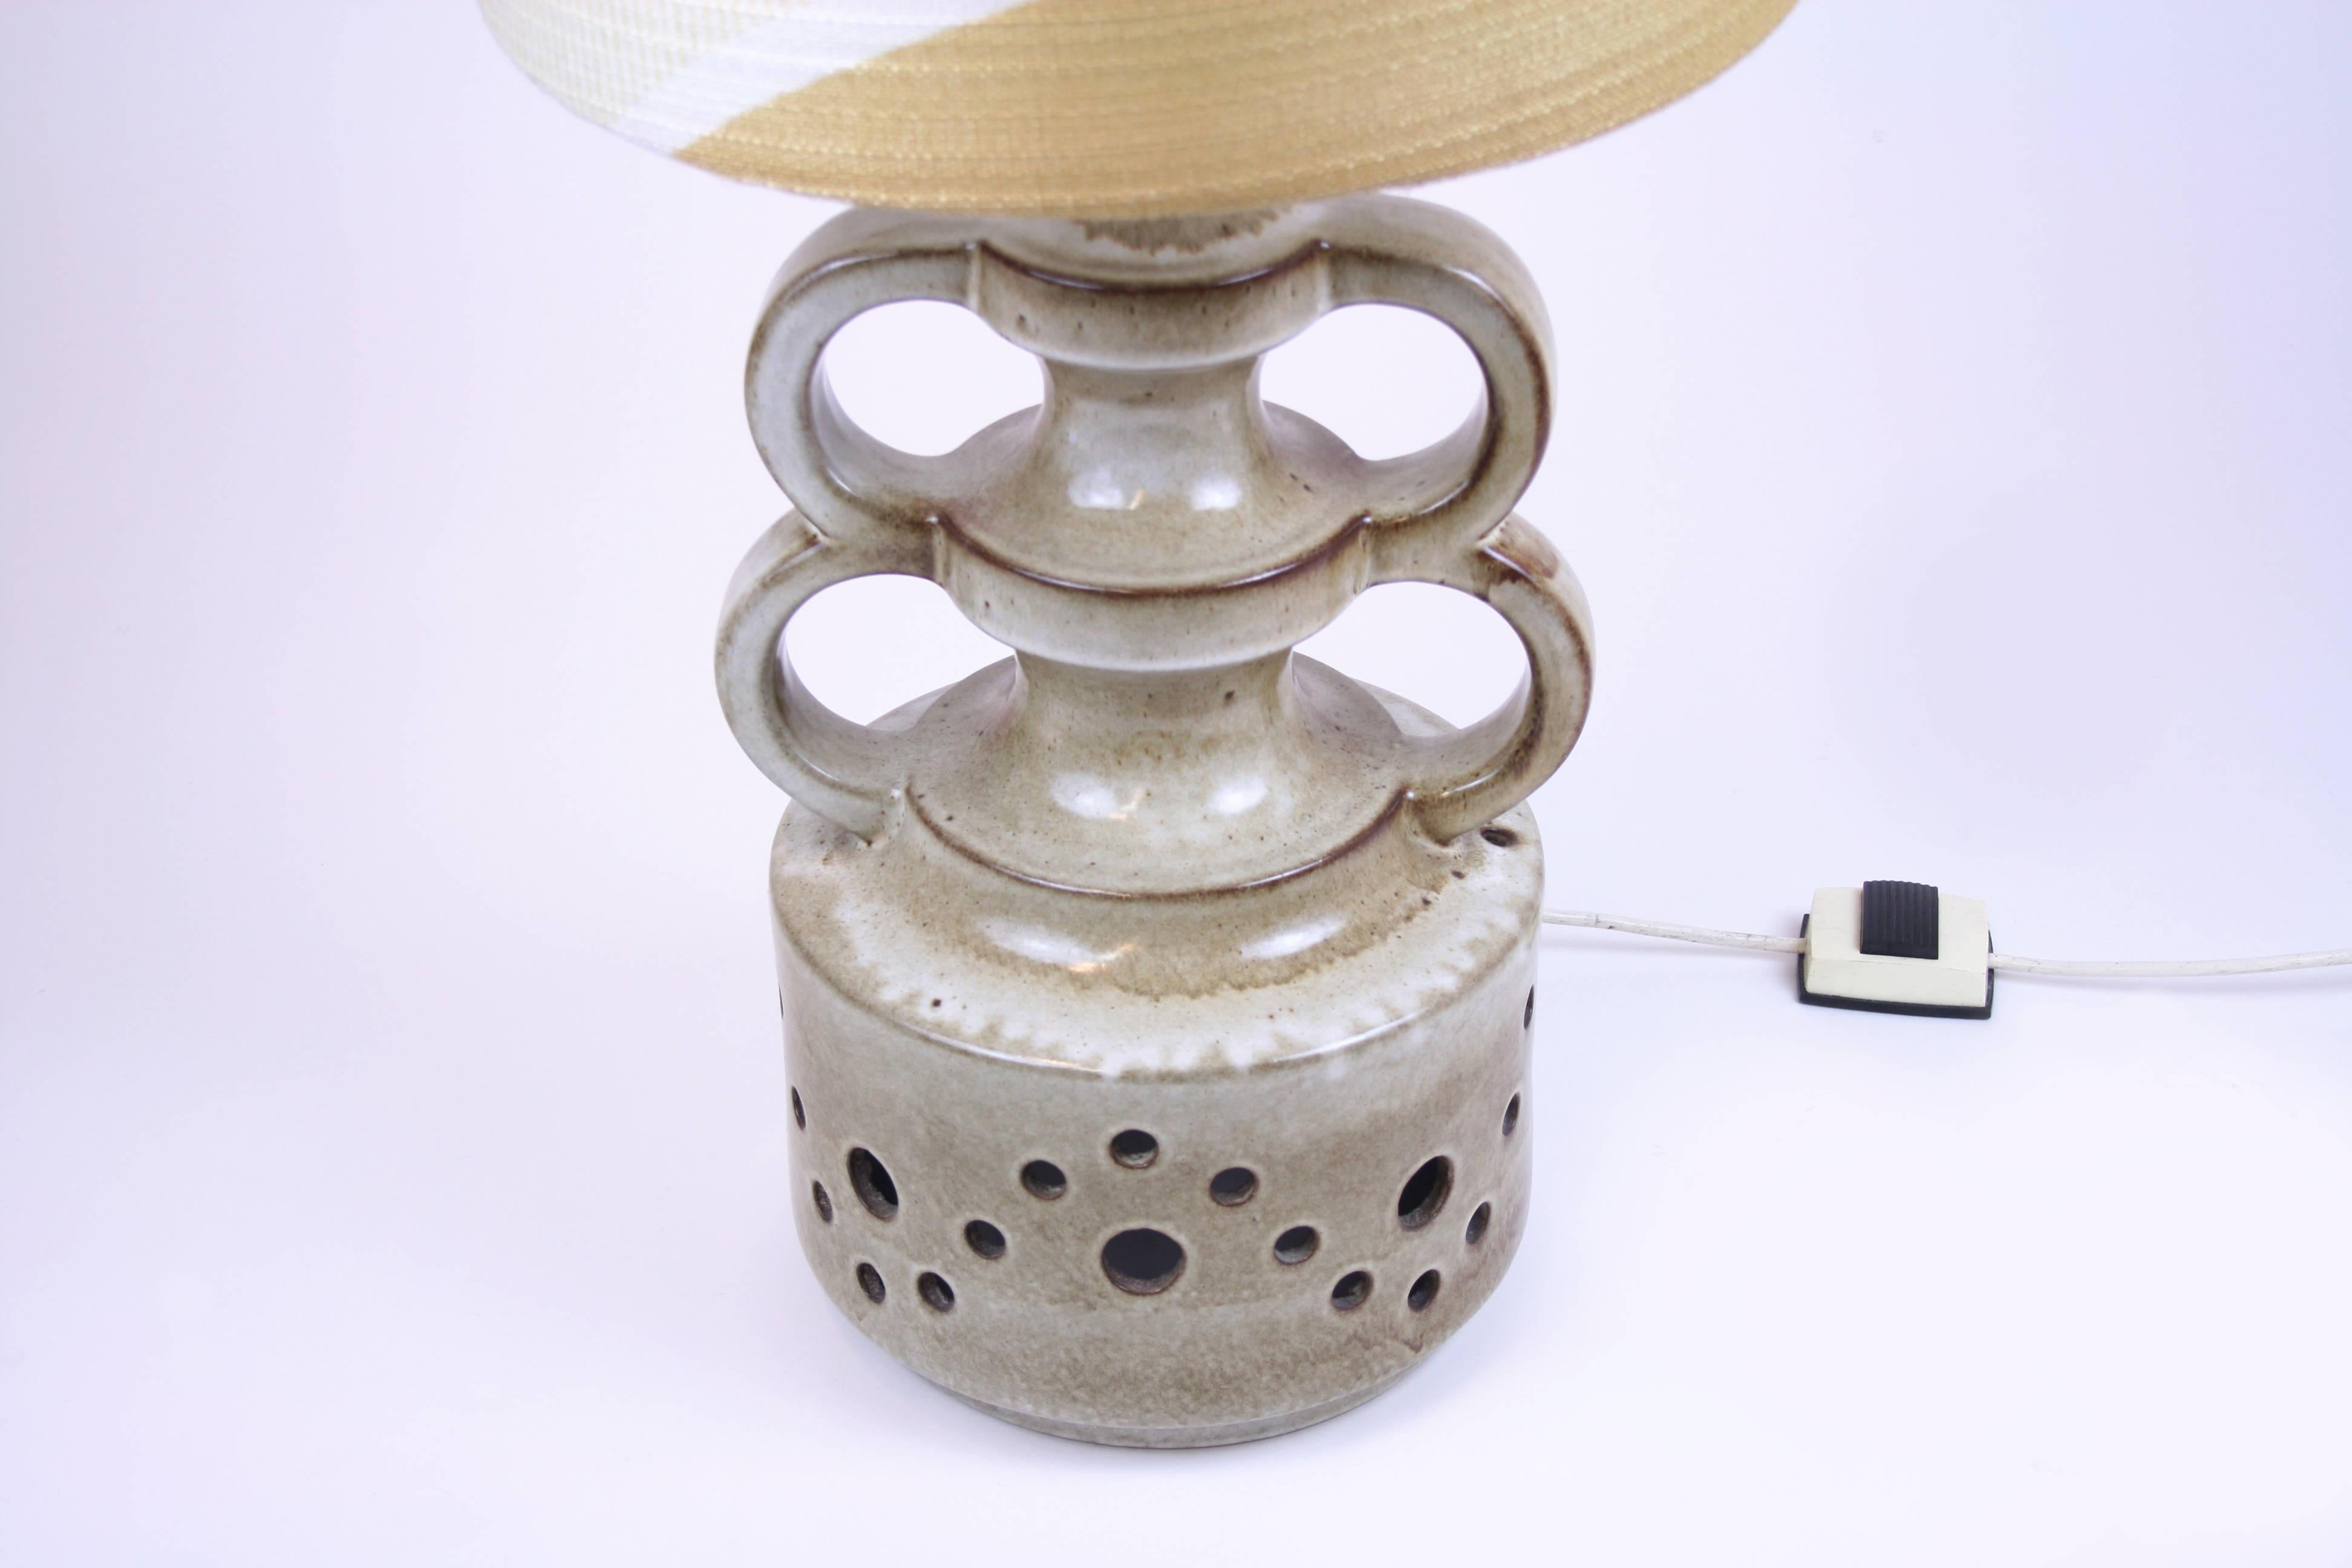 Floorlamp design with illuninated partly hollowed ceramic pottery basis, France 1960s. Very unusual object with sculptural character in completely original unrestored condition. The lampshade shows typical patterns of the period.